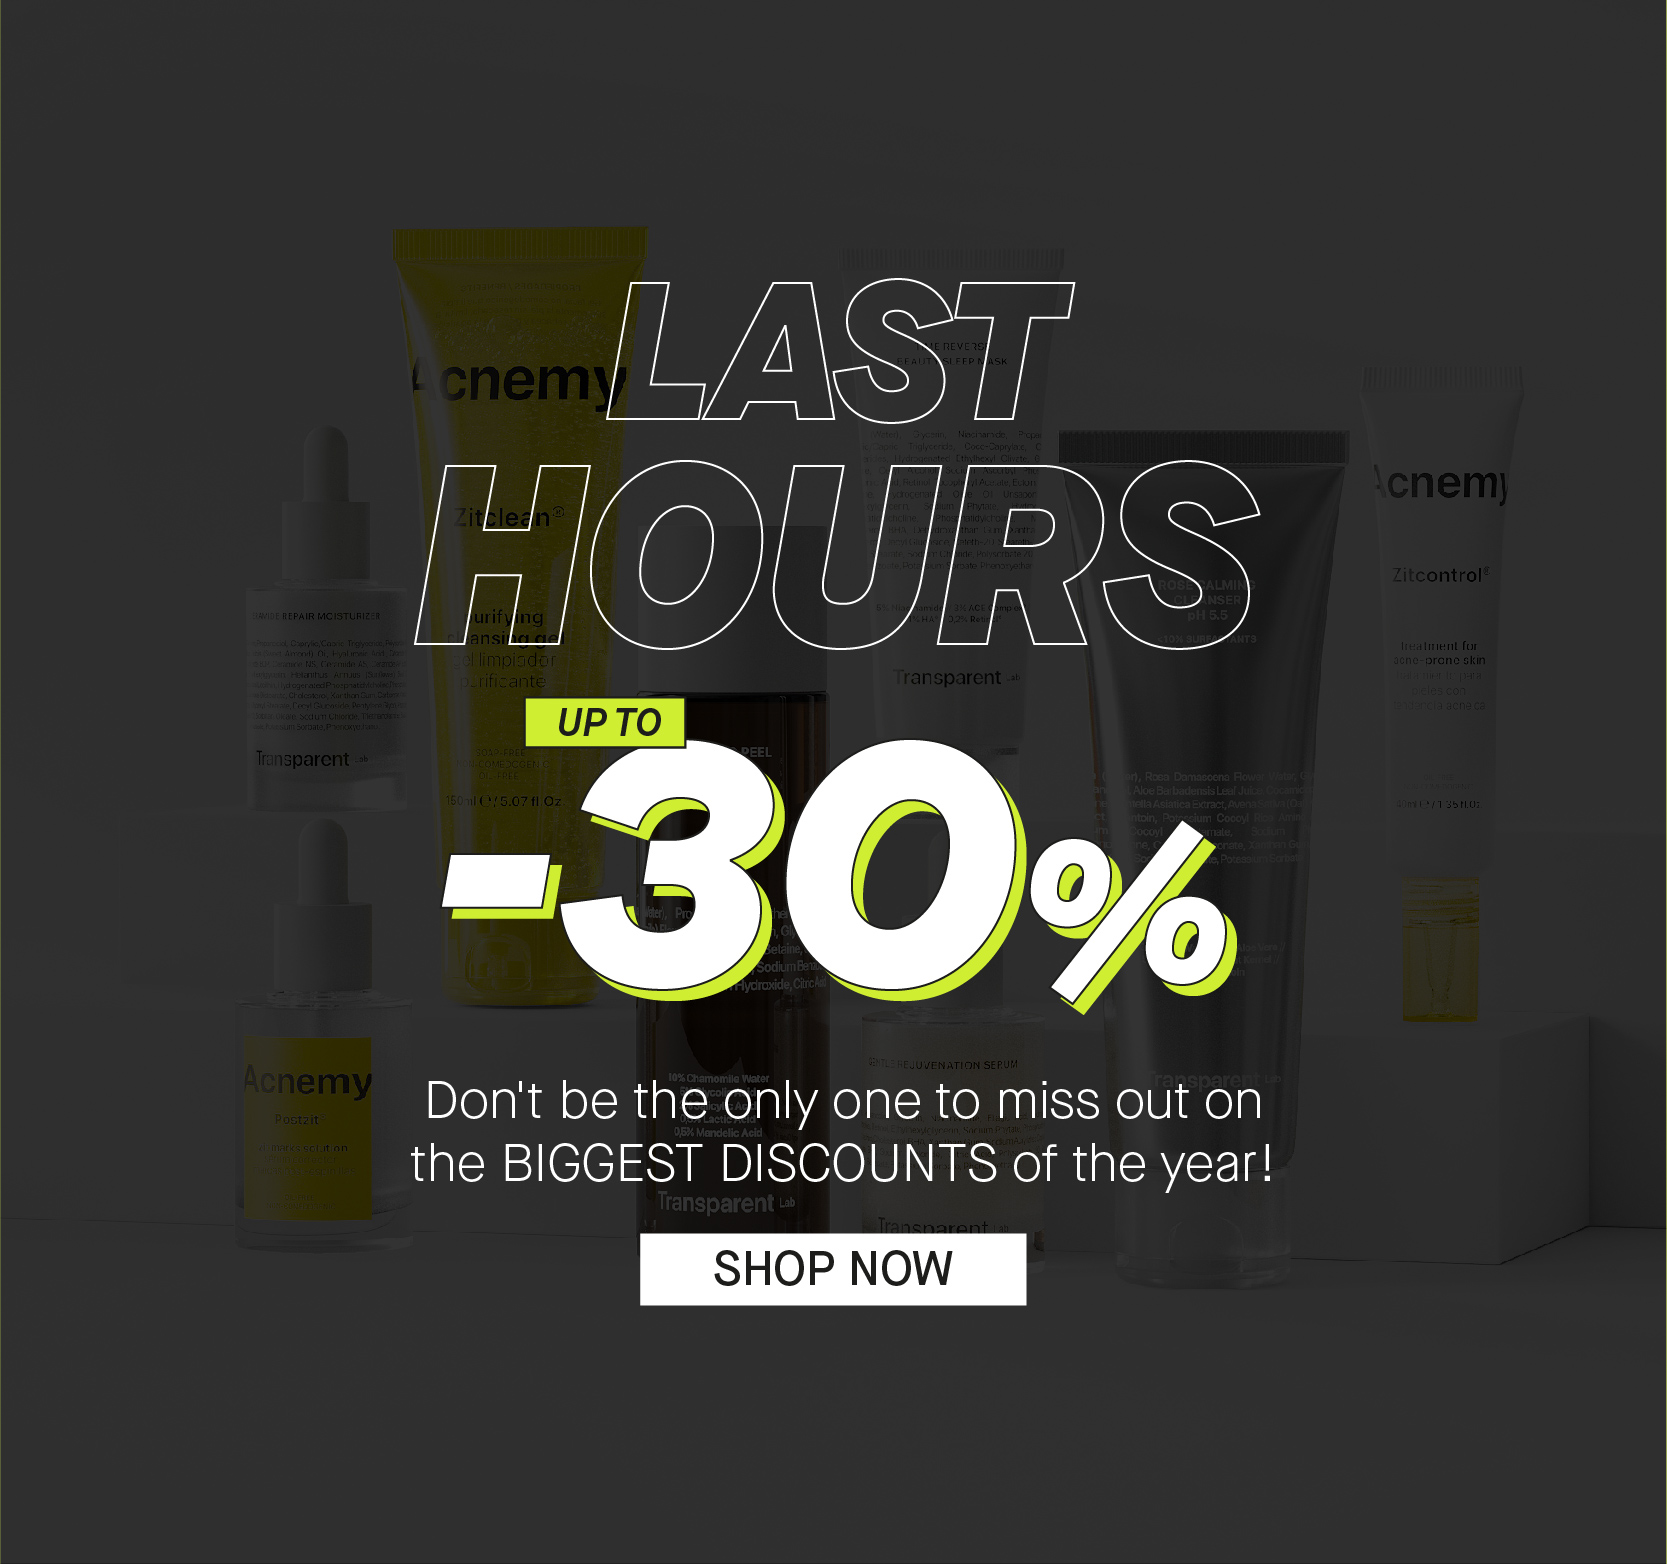 LAST HOURS UPTO -30% Don't be the only one to miss out on the BIGGEST DISCOUNTS of the year! SHOP NOW 